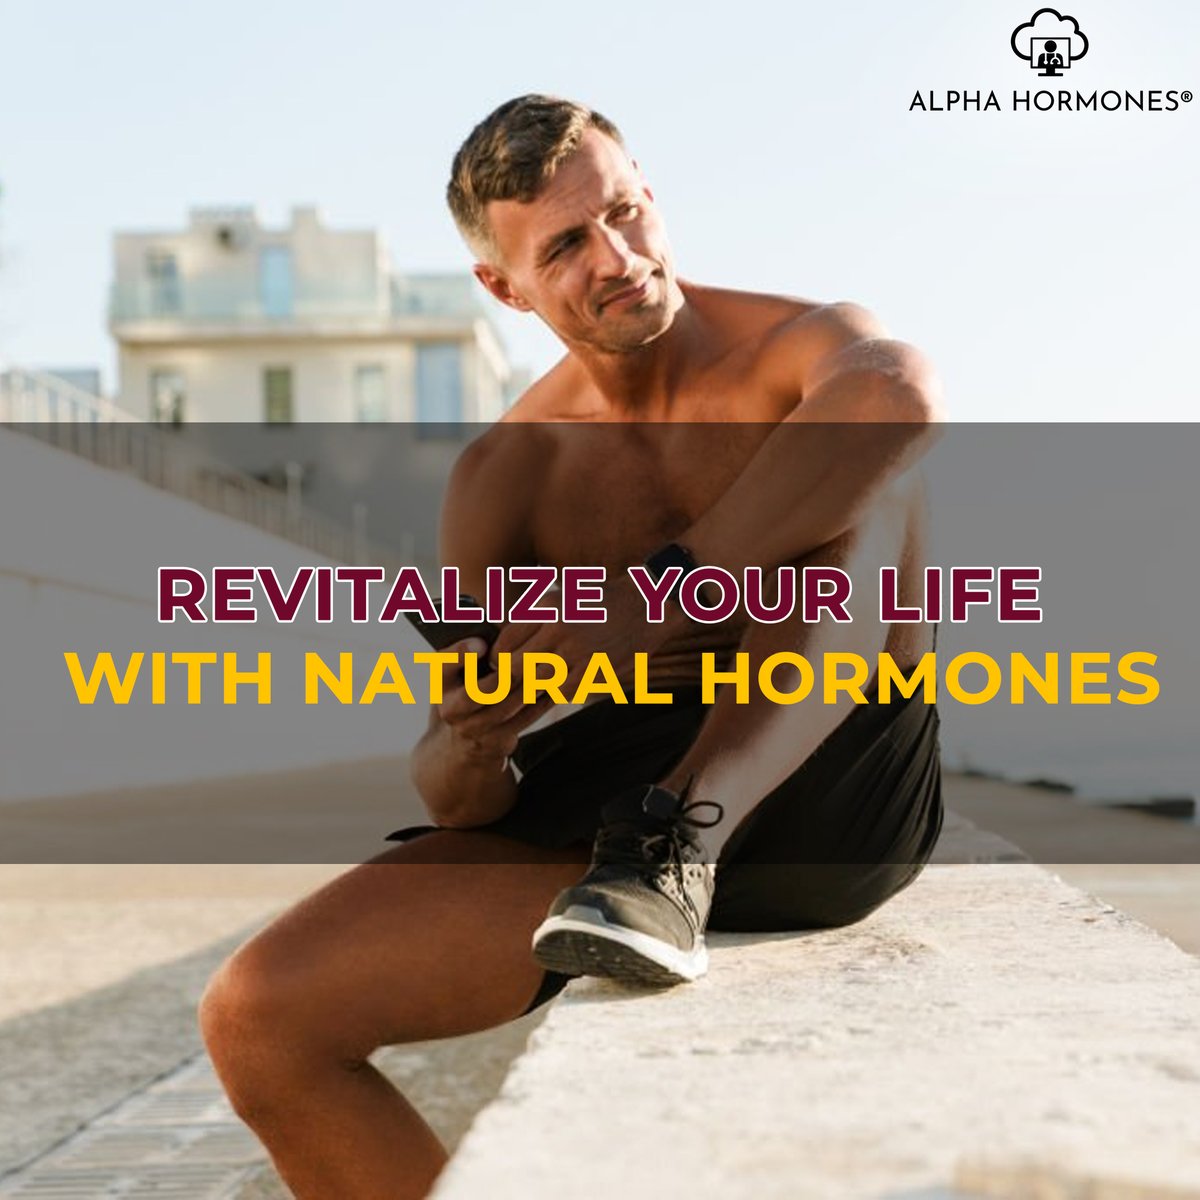 We are here to improve your health and quality of life with exceptional medical care and hormone therapy.

alphahormones.com

#AlphaHormones  #prohormones #hormonesupport #hormonesthenextgen #bioidenticalhormones #balancehormones #balancedhormones #womenshormones